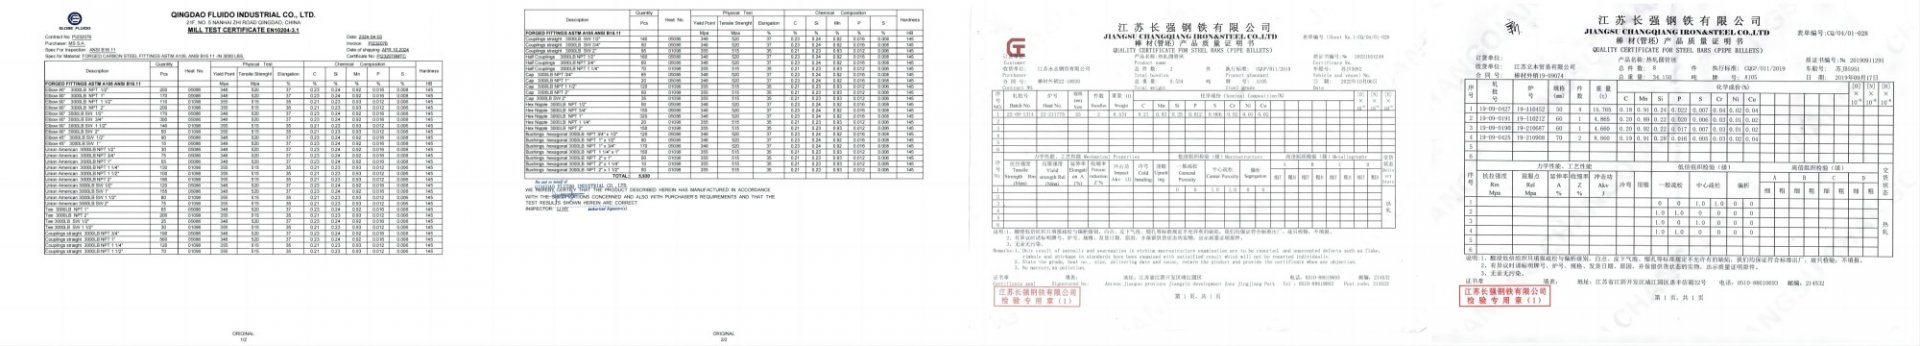 Cutting-high-pressure-pipe-fitting-material-list